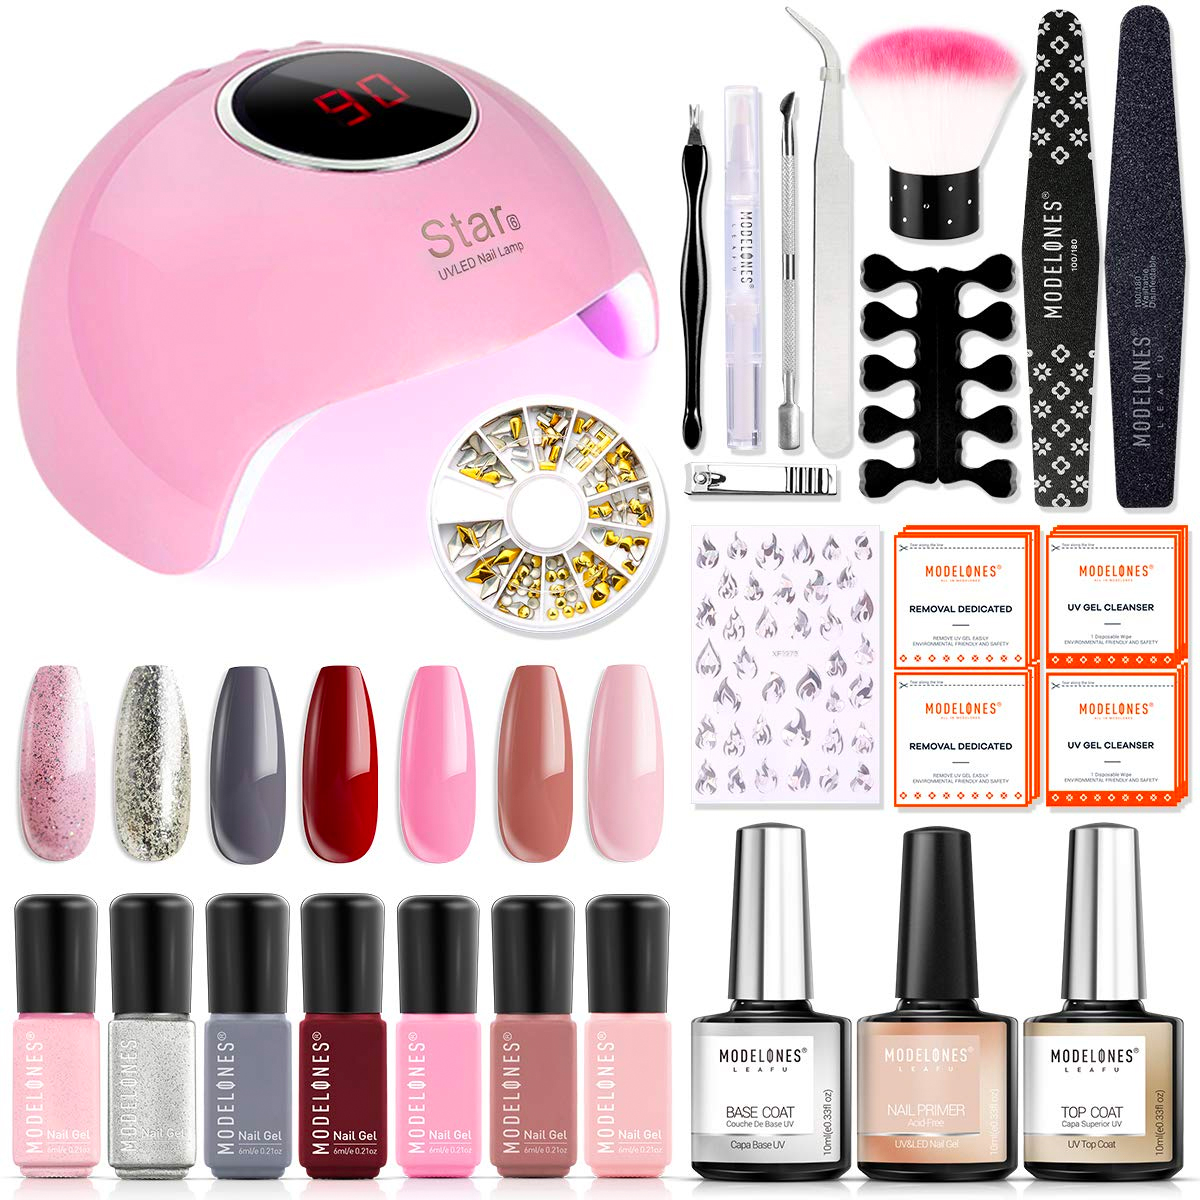 The 8 Best At-Home Gel Manicure Kits for Perfect Nails | Who What Wear